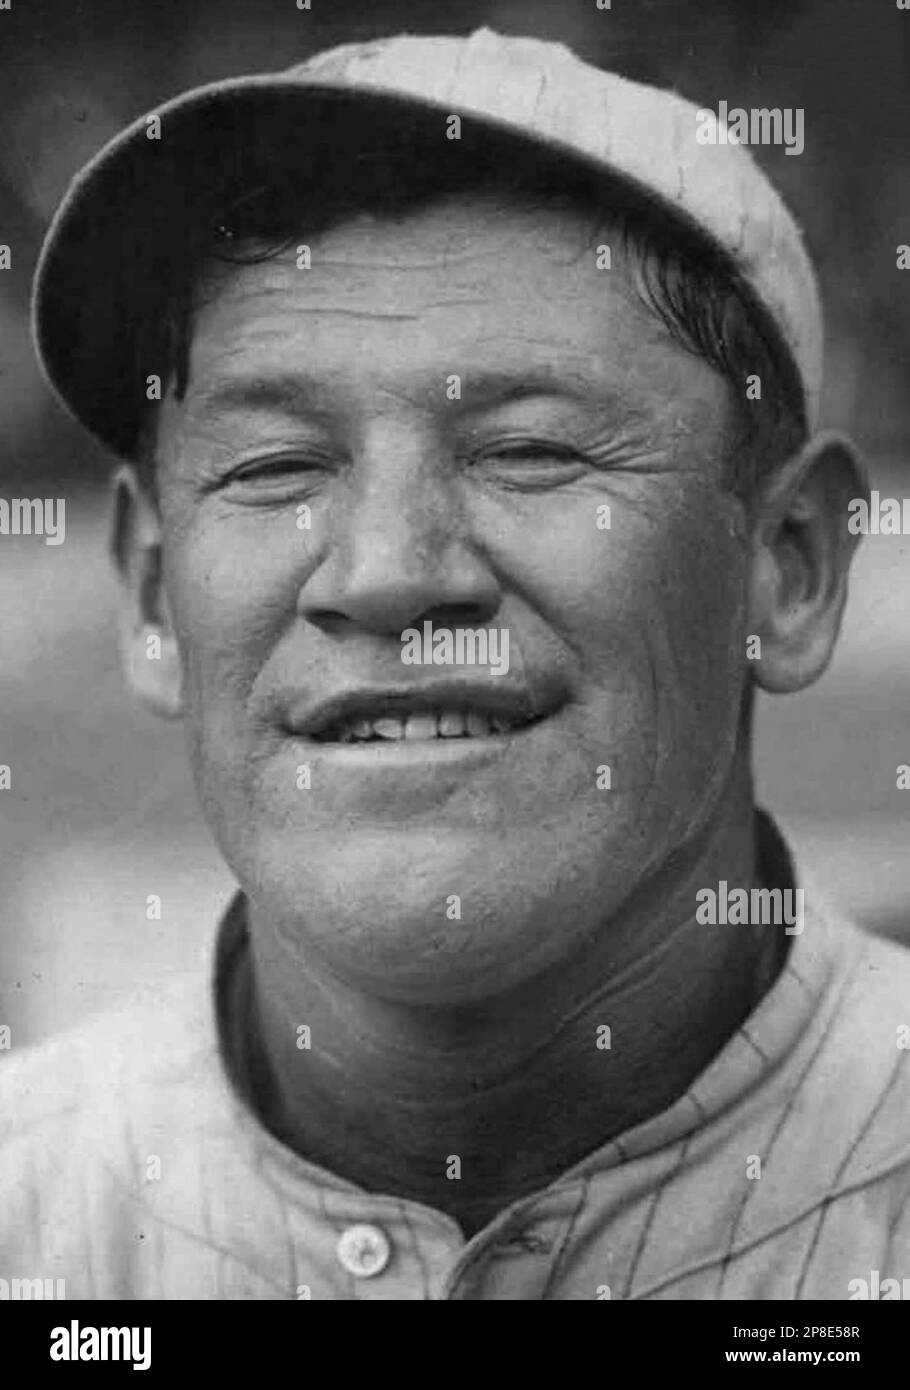 Professional baseball player Jim Thorpe as a member of the New York Giants. Stock Photo